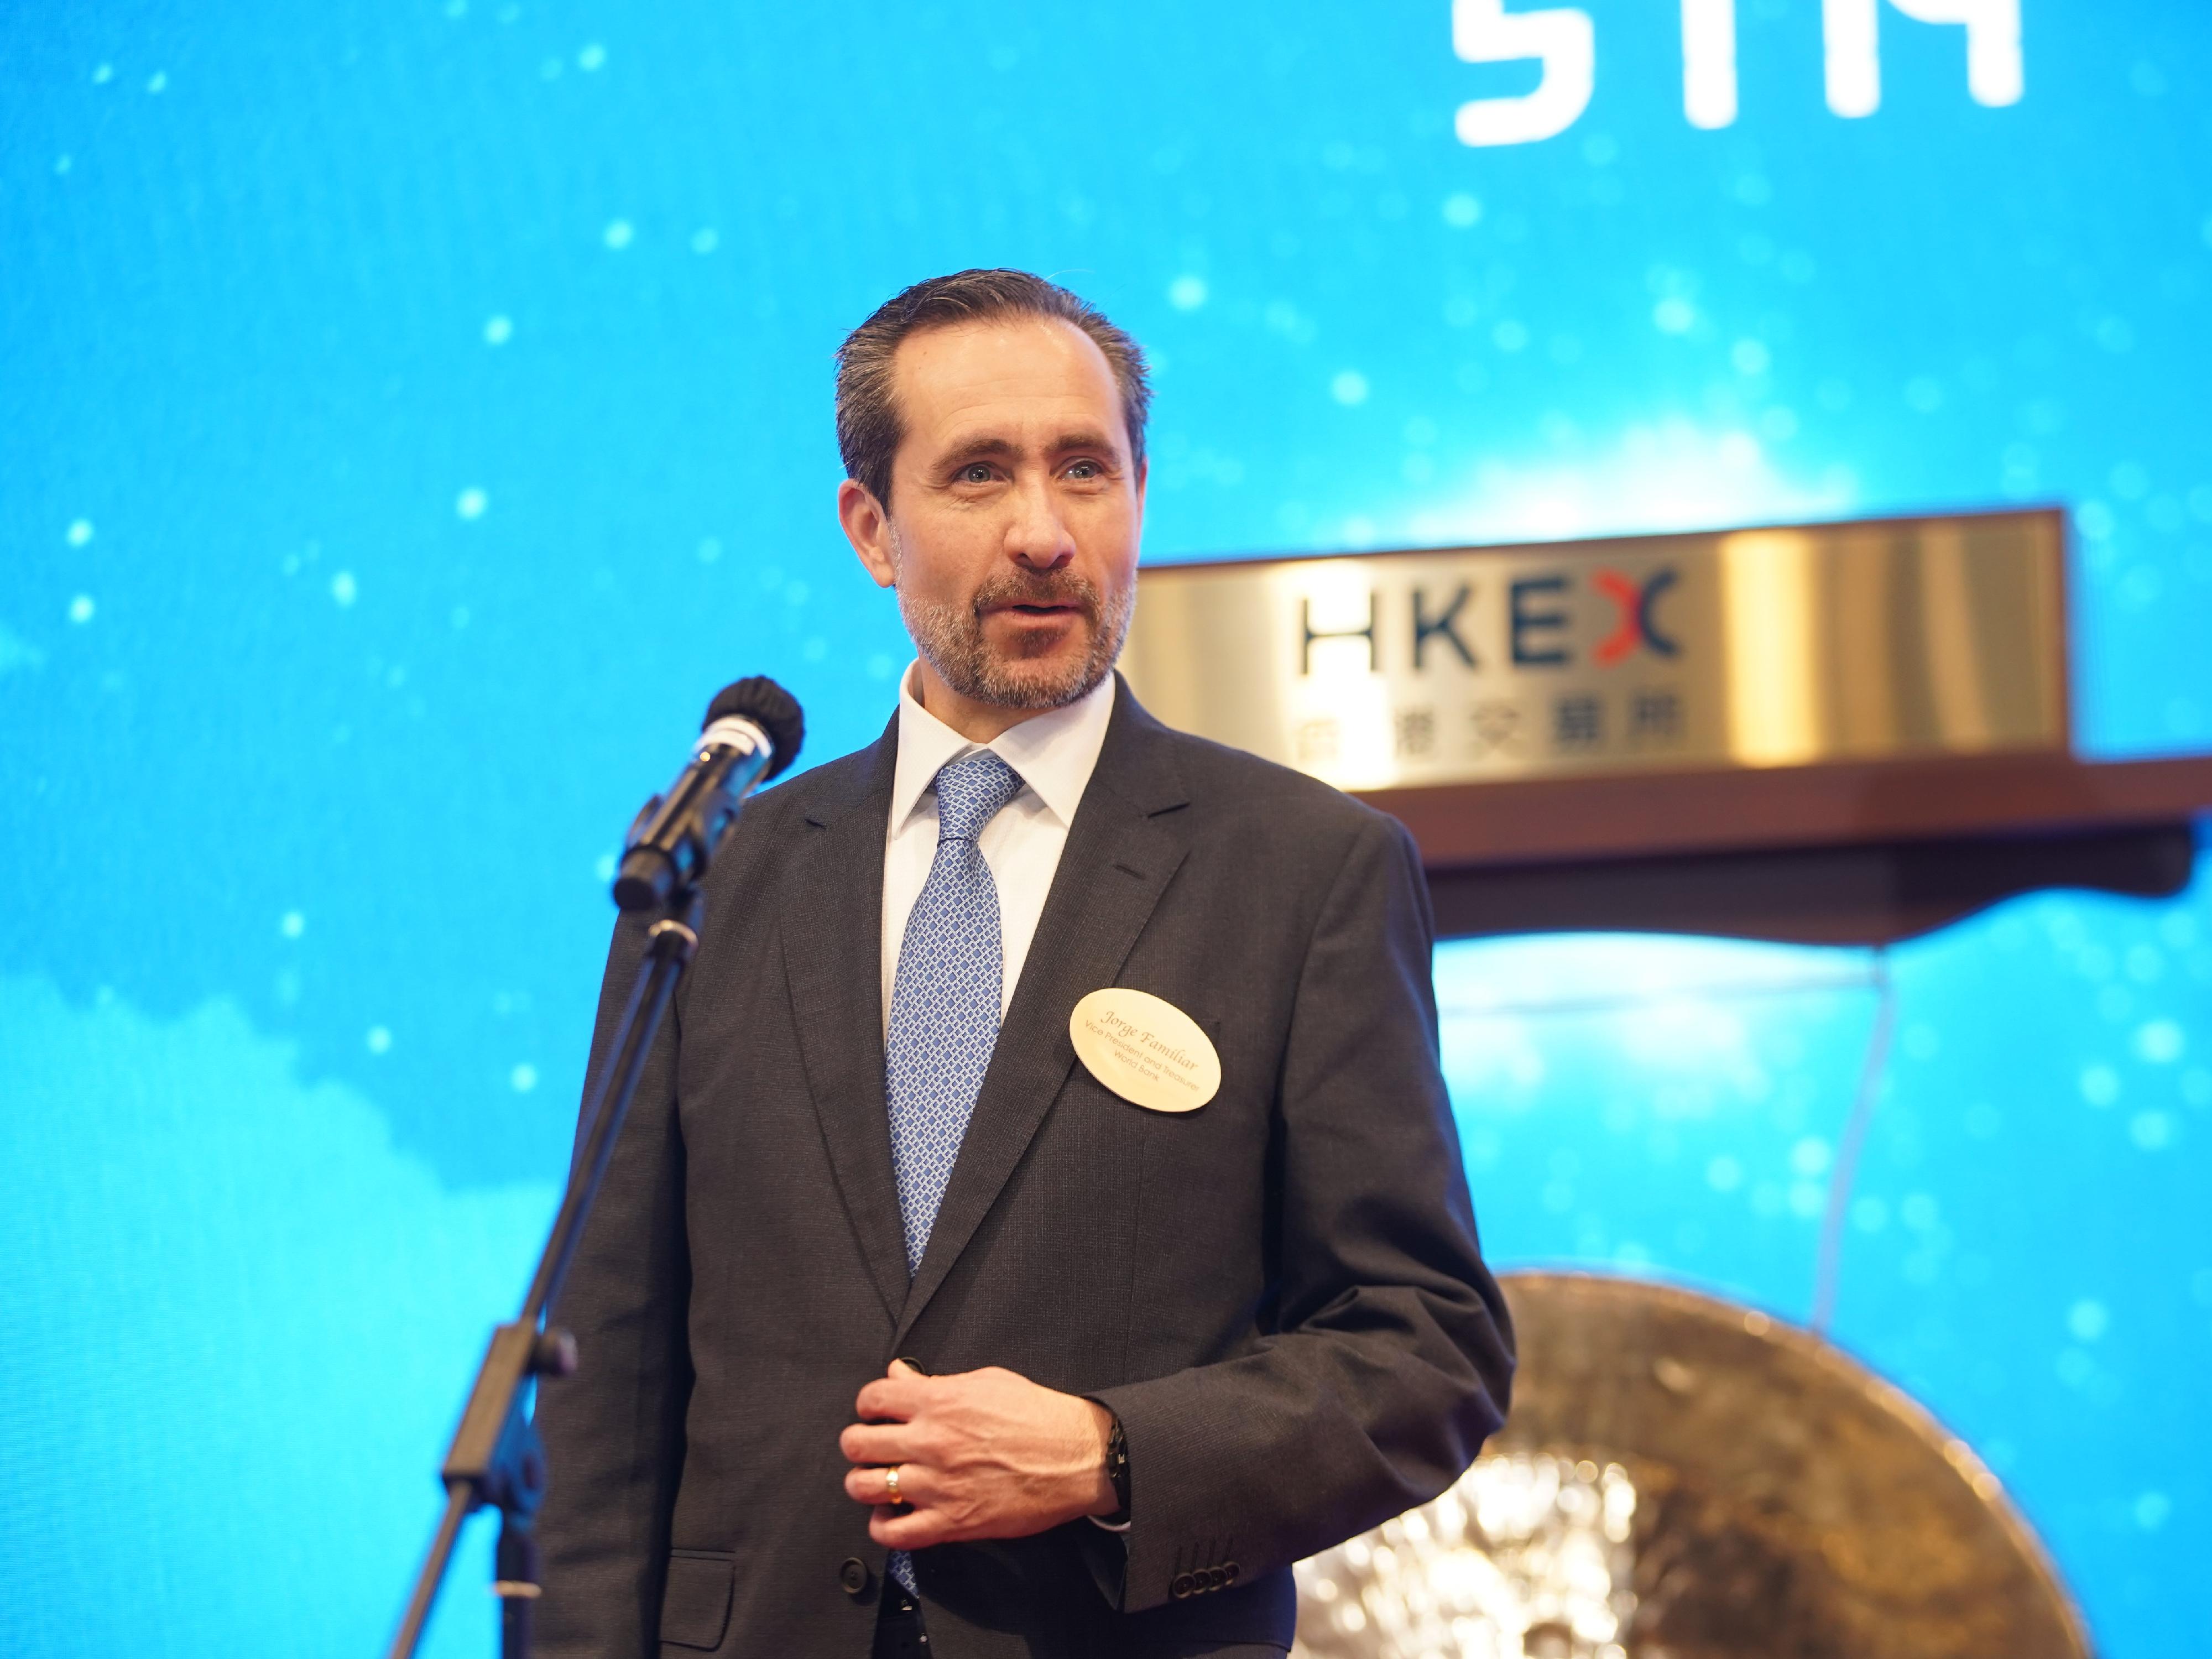 A gong-strike ceremony was held today (March 28) at the Hong Kong Exchanges and Clearing Limited to mark the inaugural insurance-linked securities listing. Photo shows the Vice President and Treasurer of the World Bank, Mr Jorge Familiar, speaking at the ceremony.